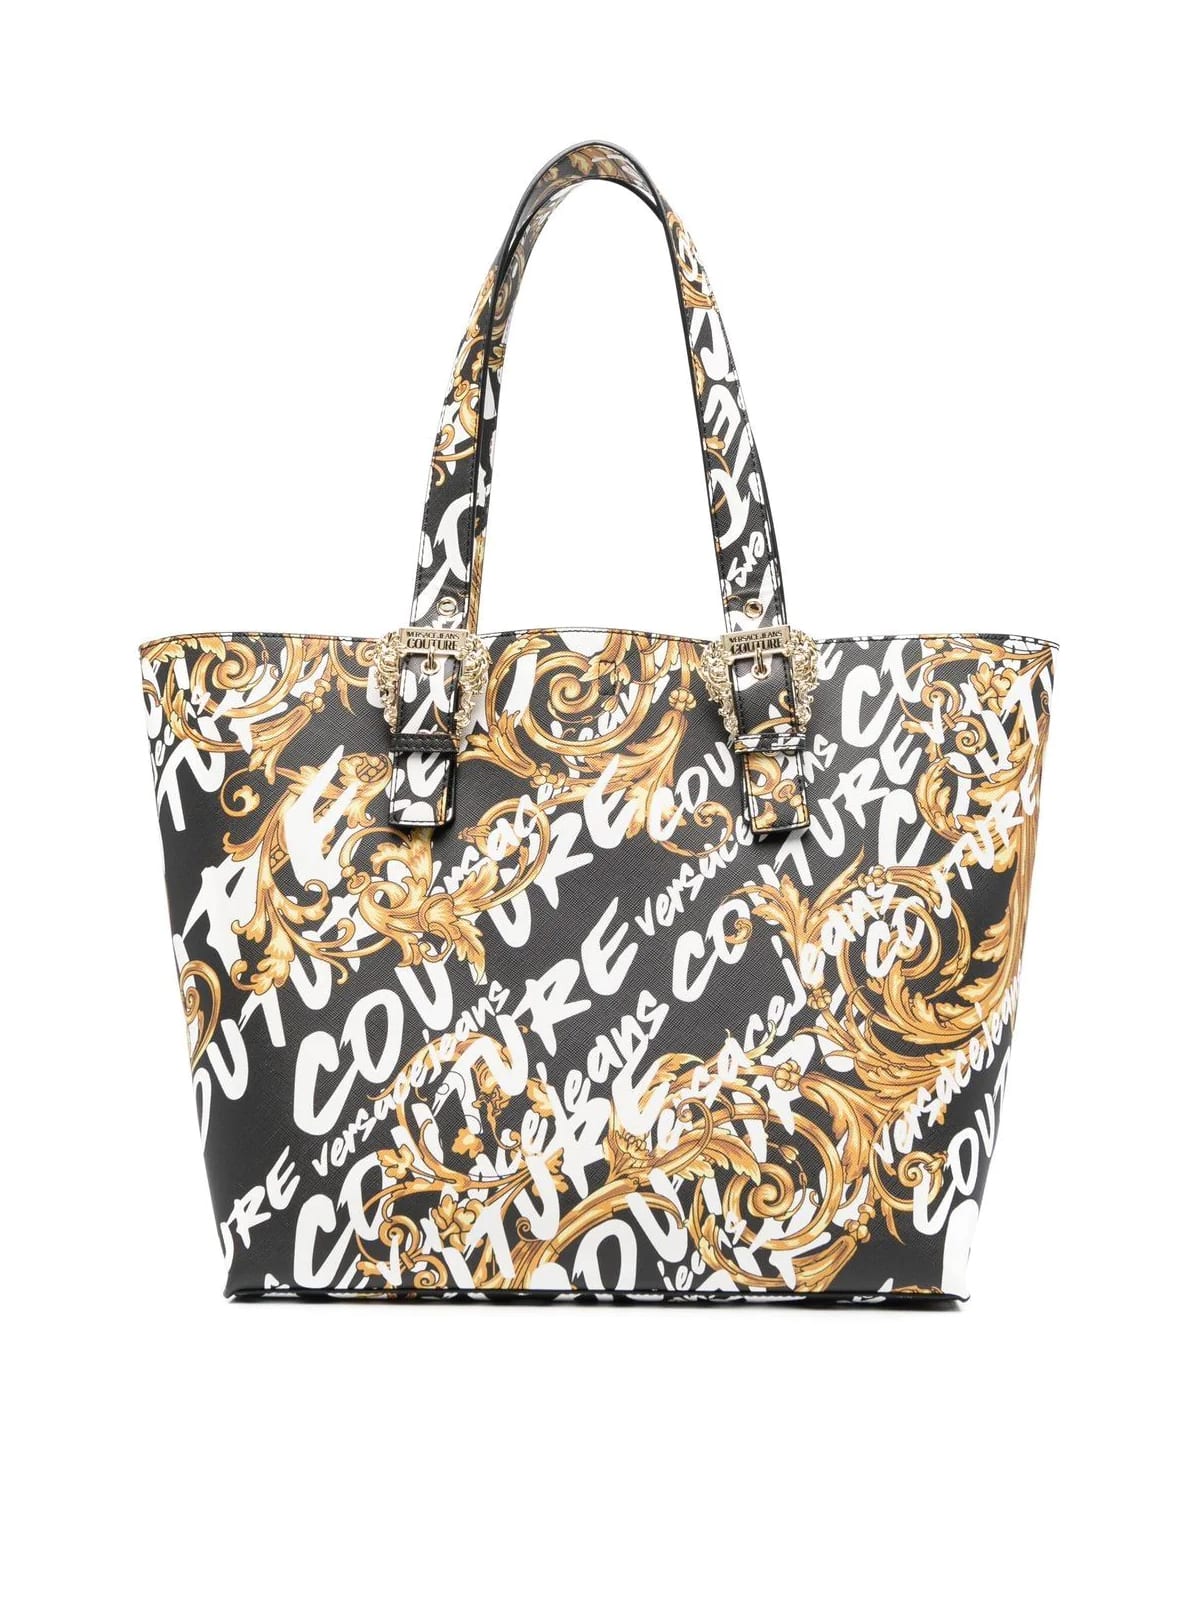 Versace Jeans Couture Range F Couture 01 Sketch 9 Couture Printed Tote Bag